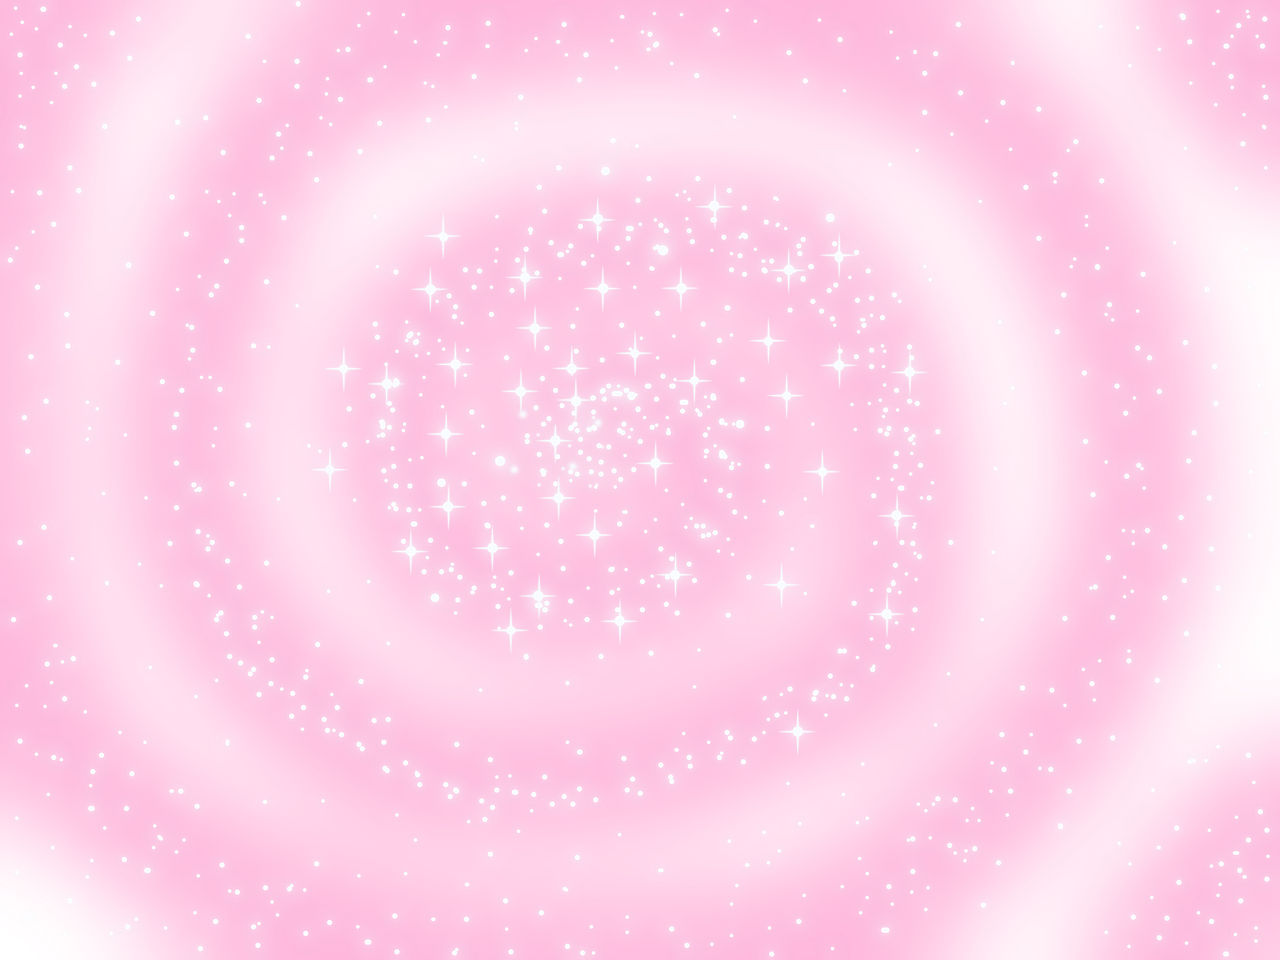 Free Image Transparent Star. Cute image for wallpaper Y2k background Cyber y2k background